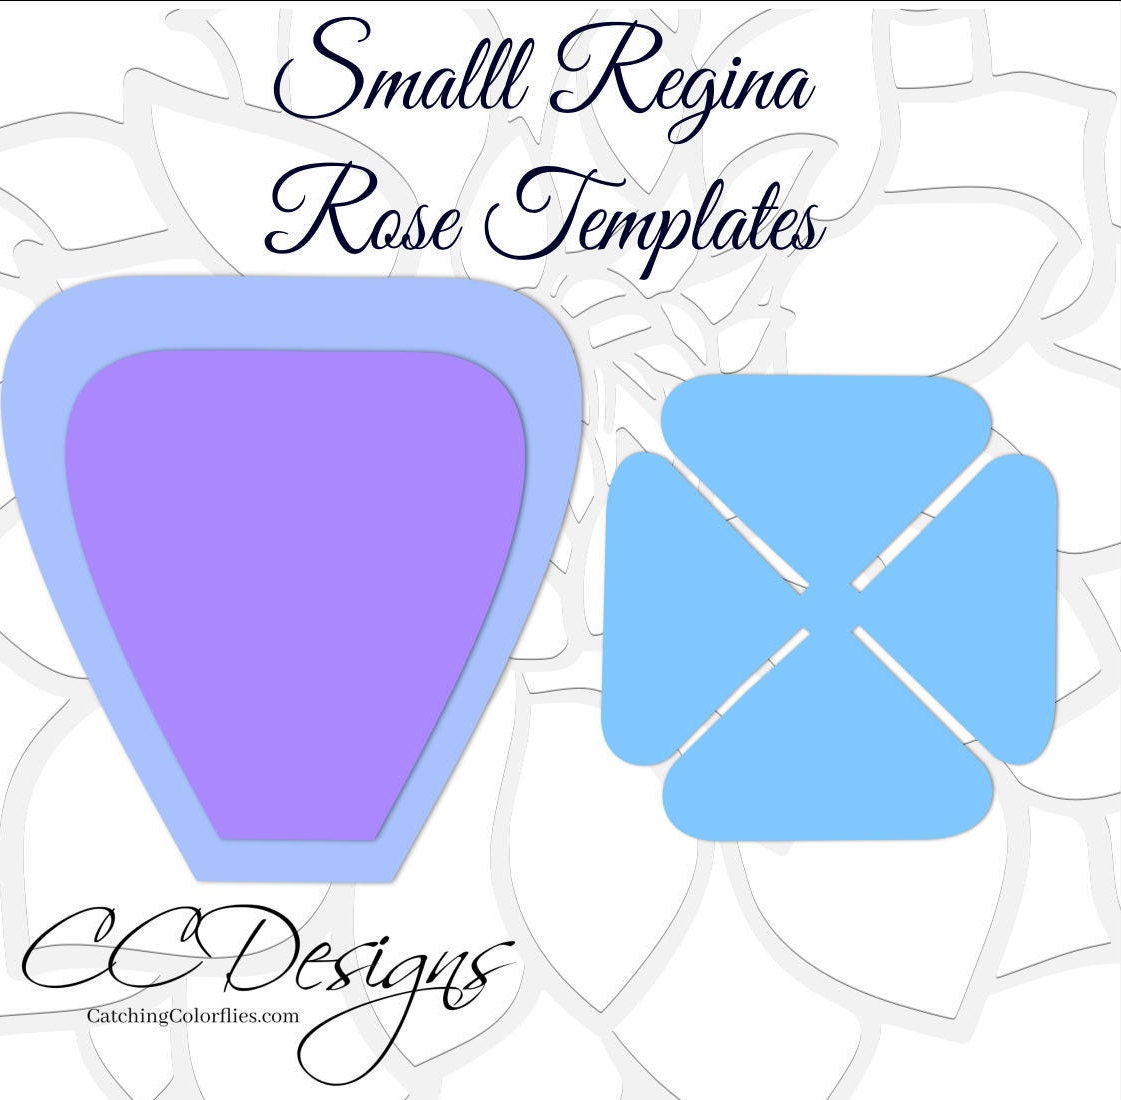 Download Giant Paper Roses Large Paper Flower Roses Rose Templates